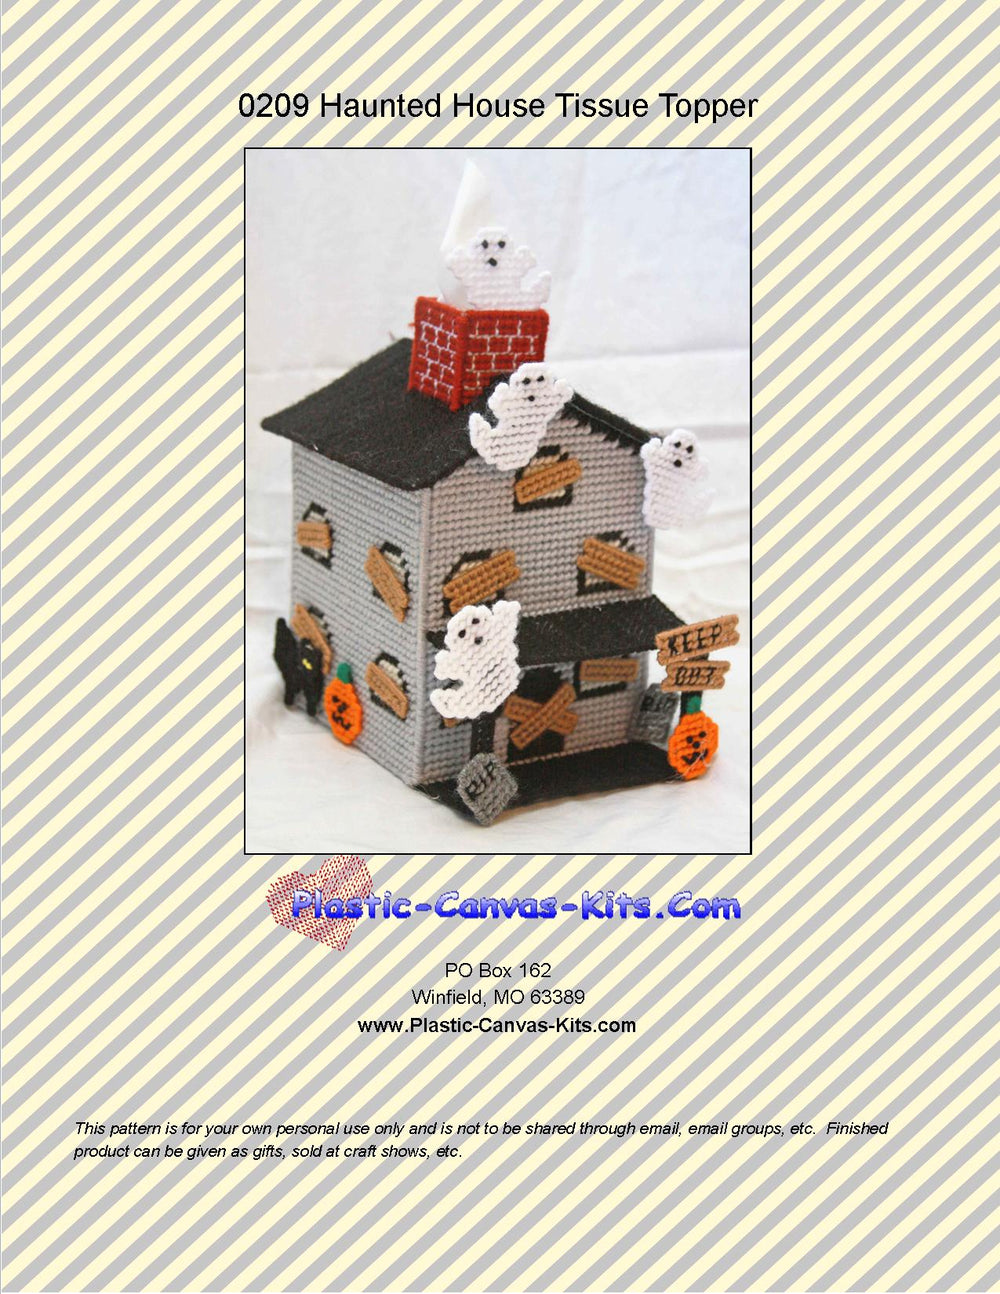 Haunted House Tissue Topper